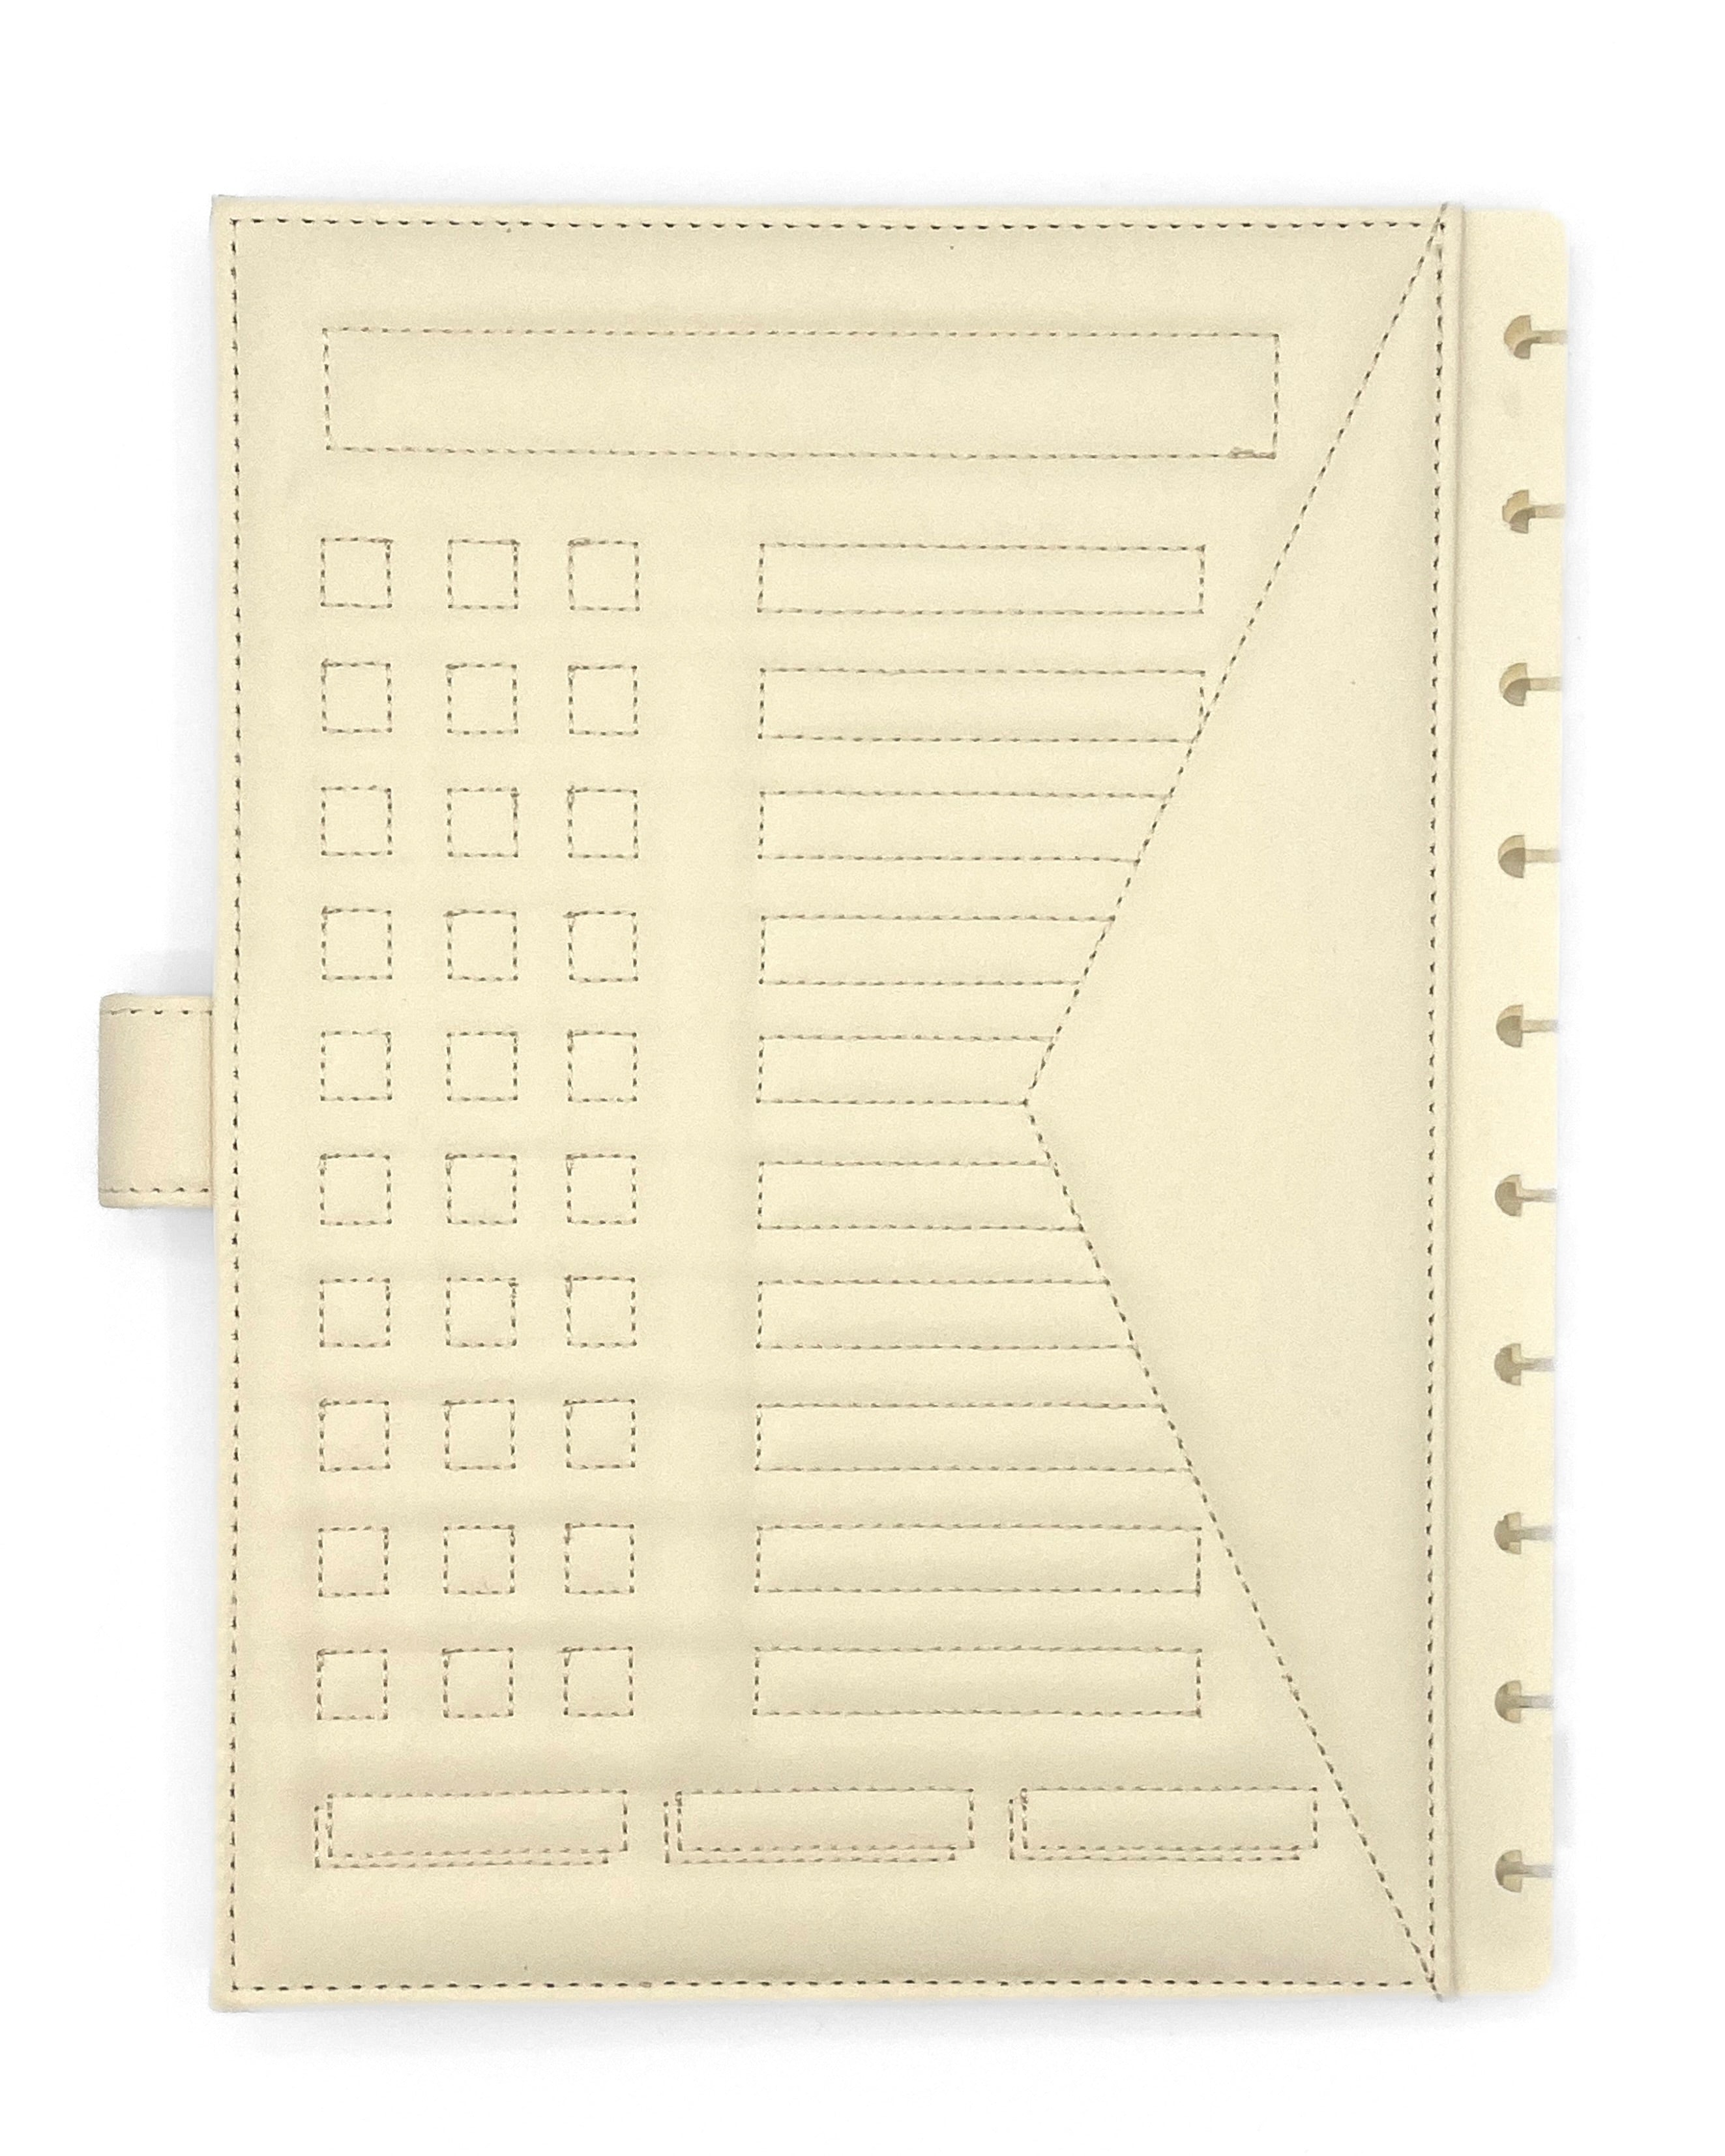 Back cover of cream faux leather planner